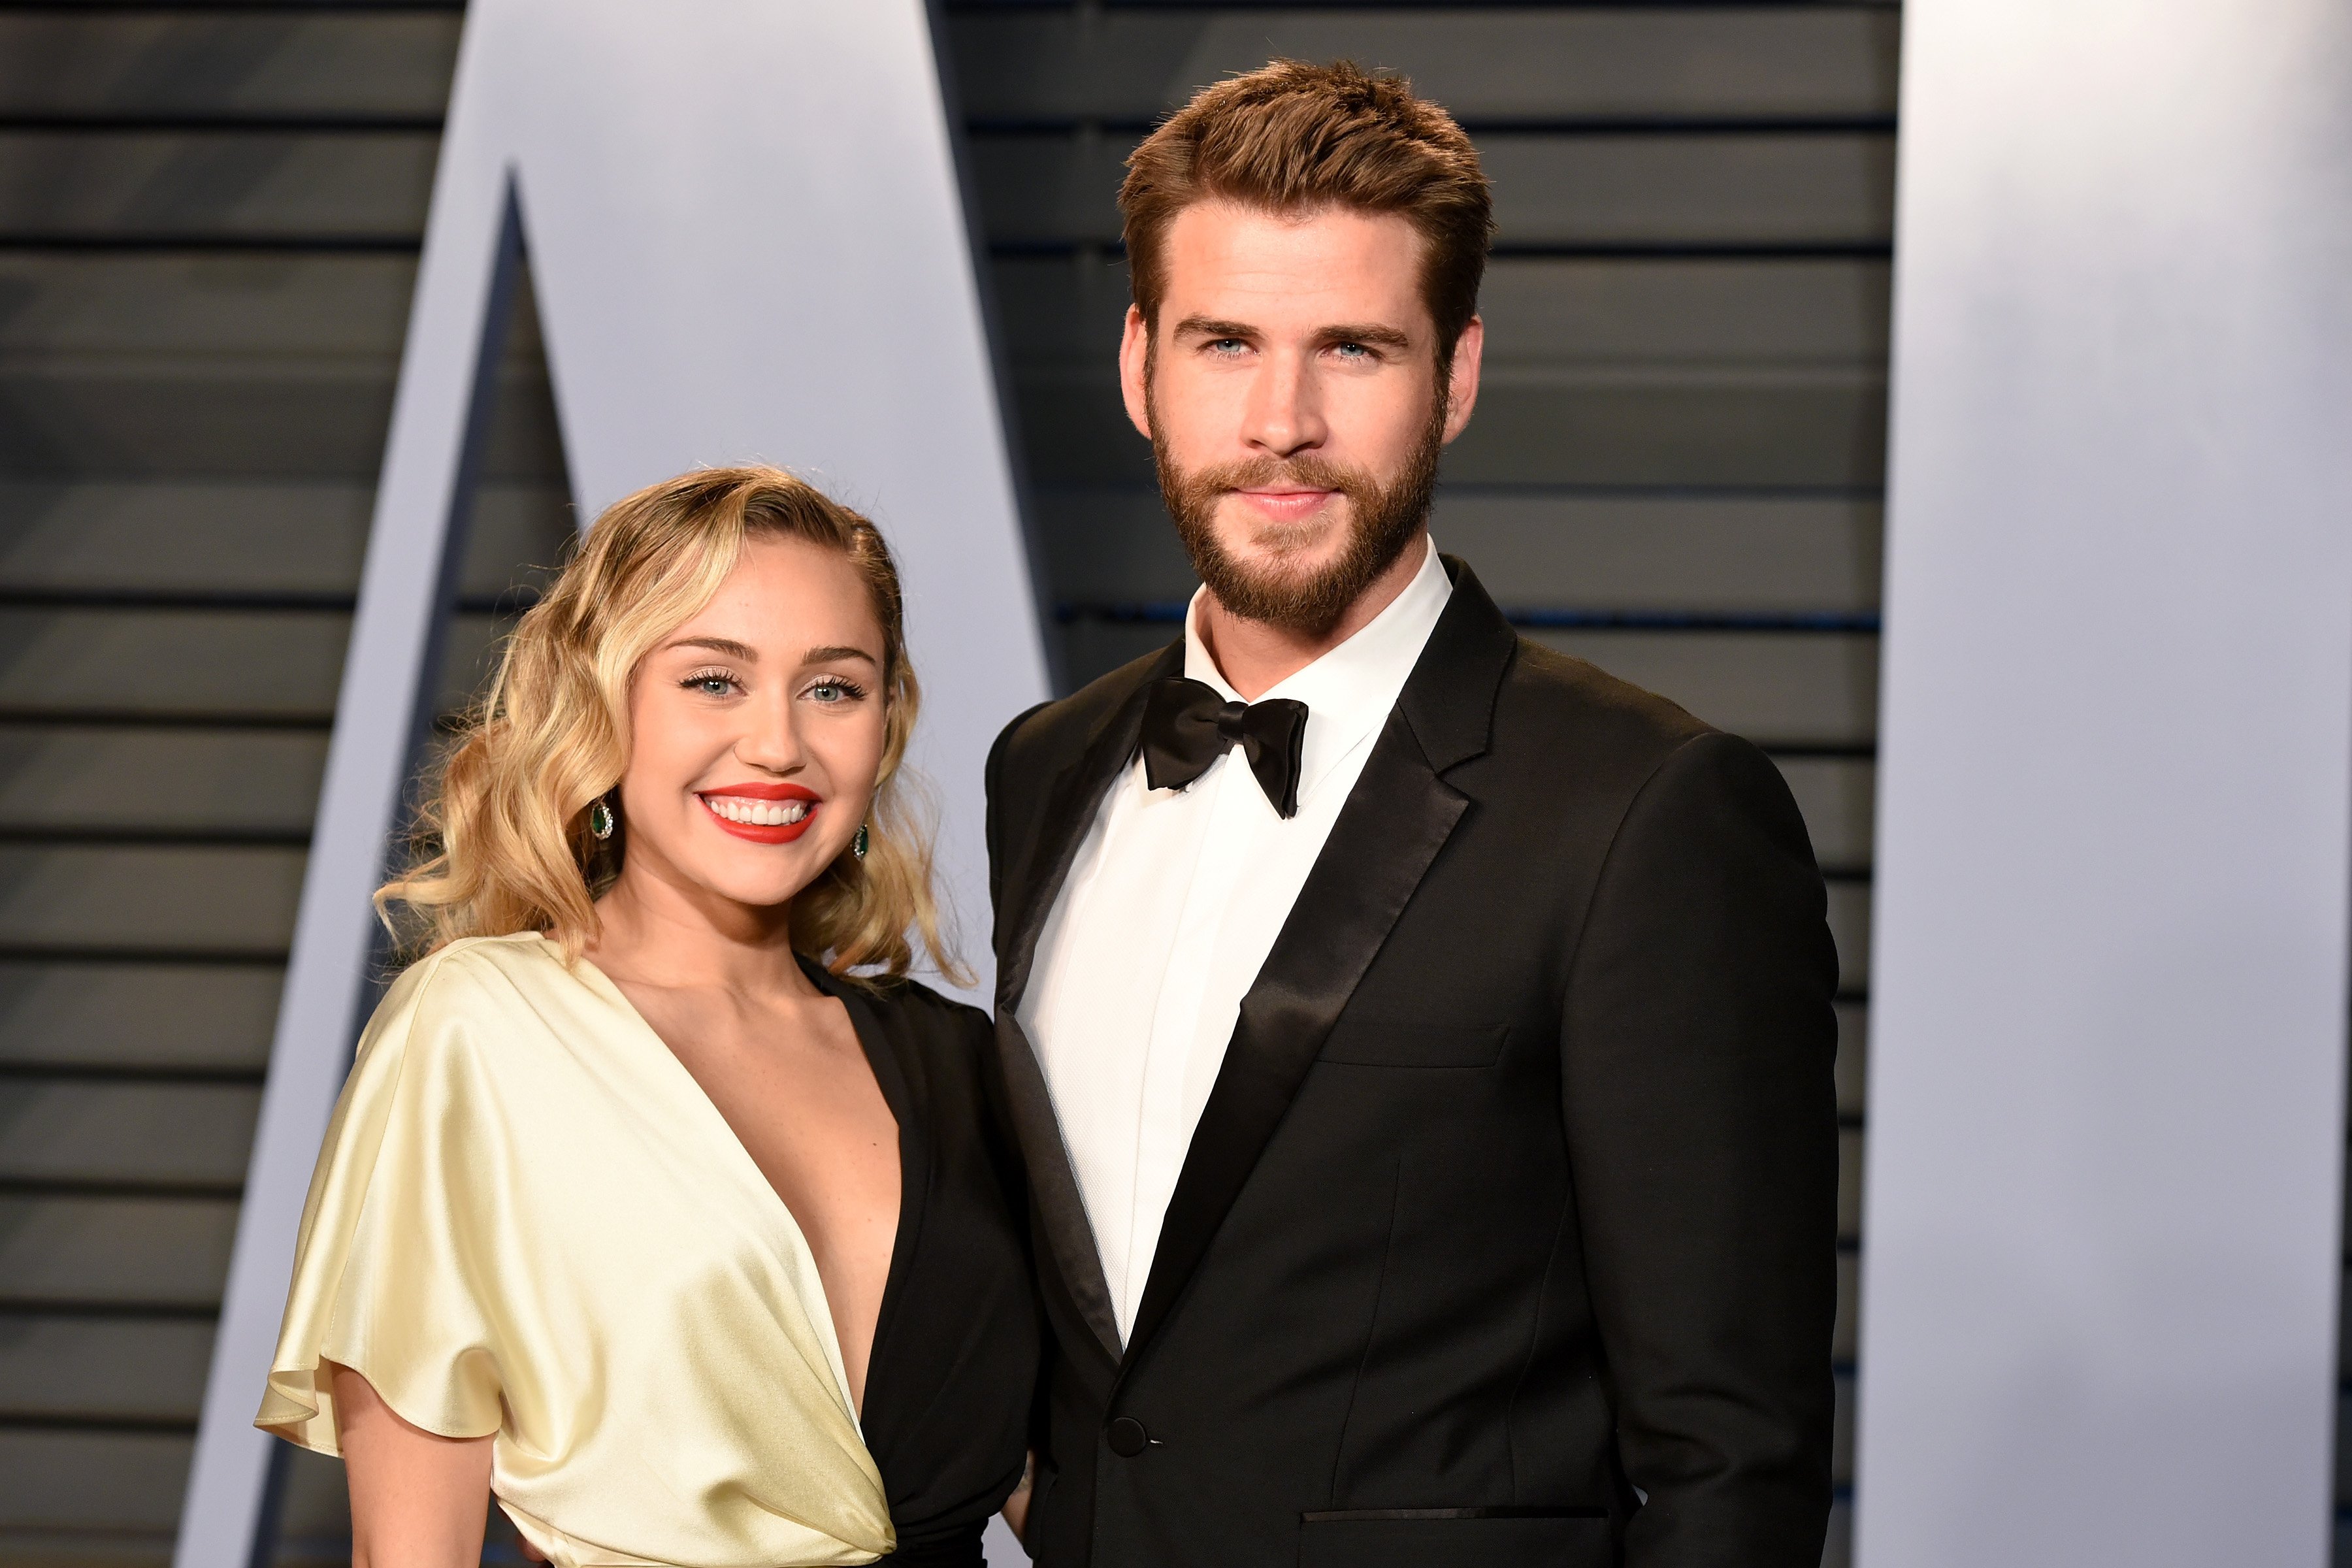 Miley Cyrus and Liam Hemsworth attend the 2018 Vanity Fair Oscar Party on March 4, 2018 in Beverly Hills, CA. 